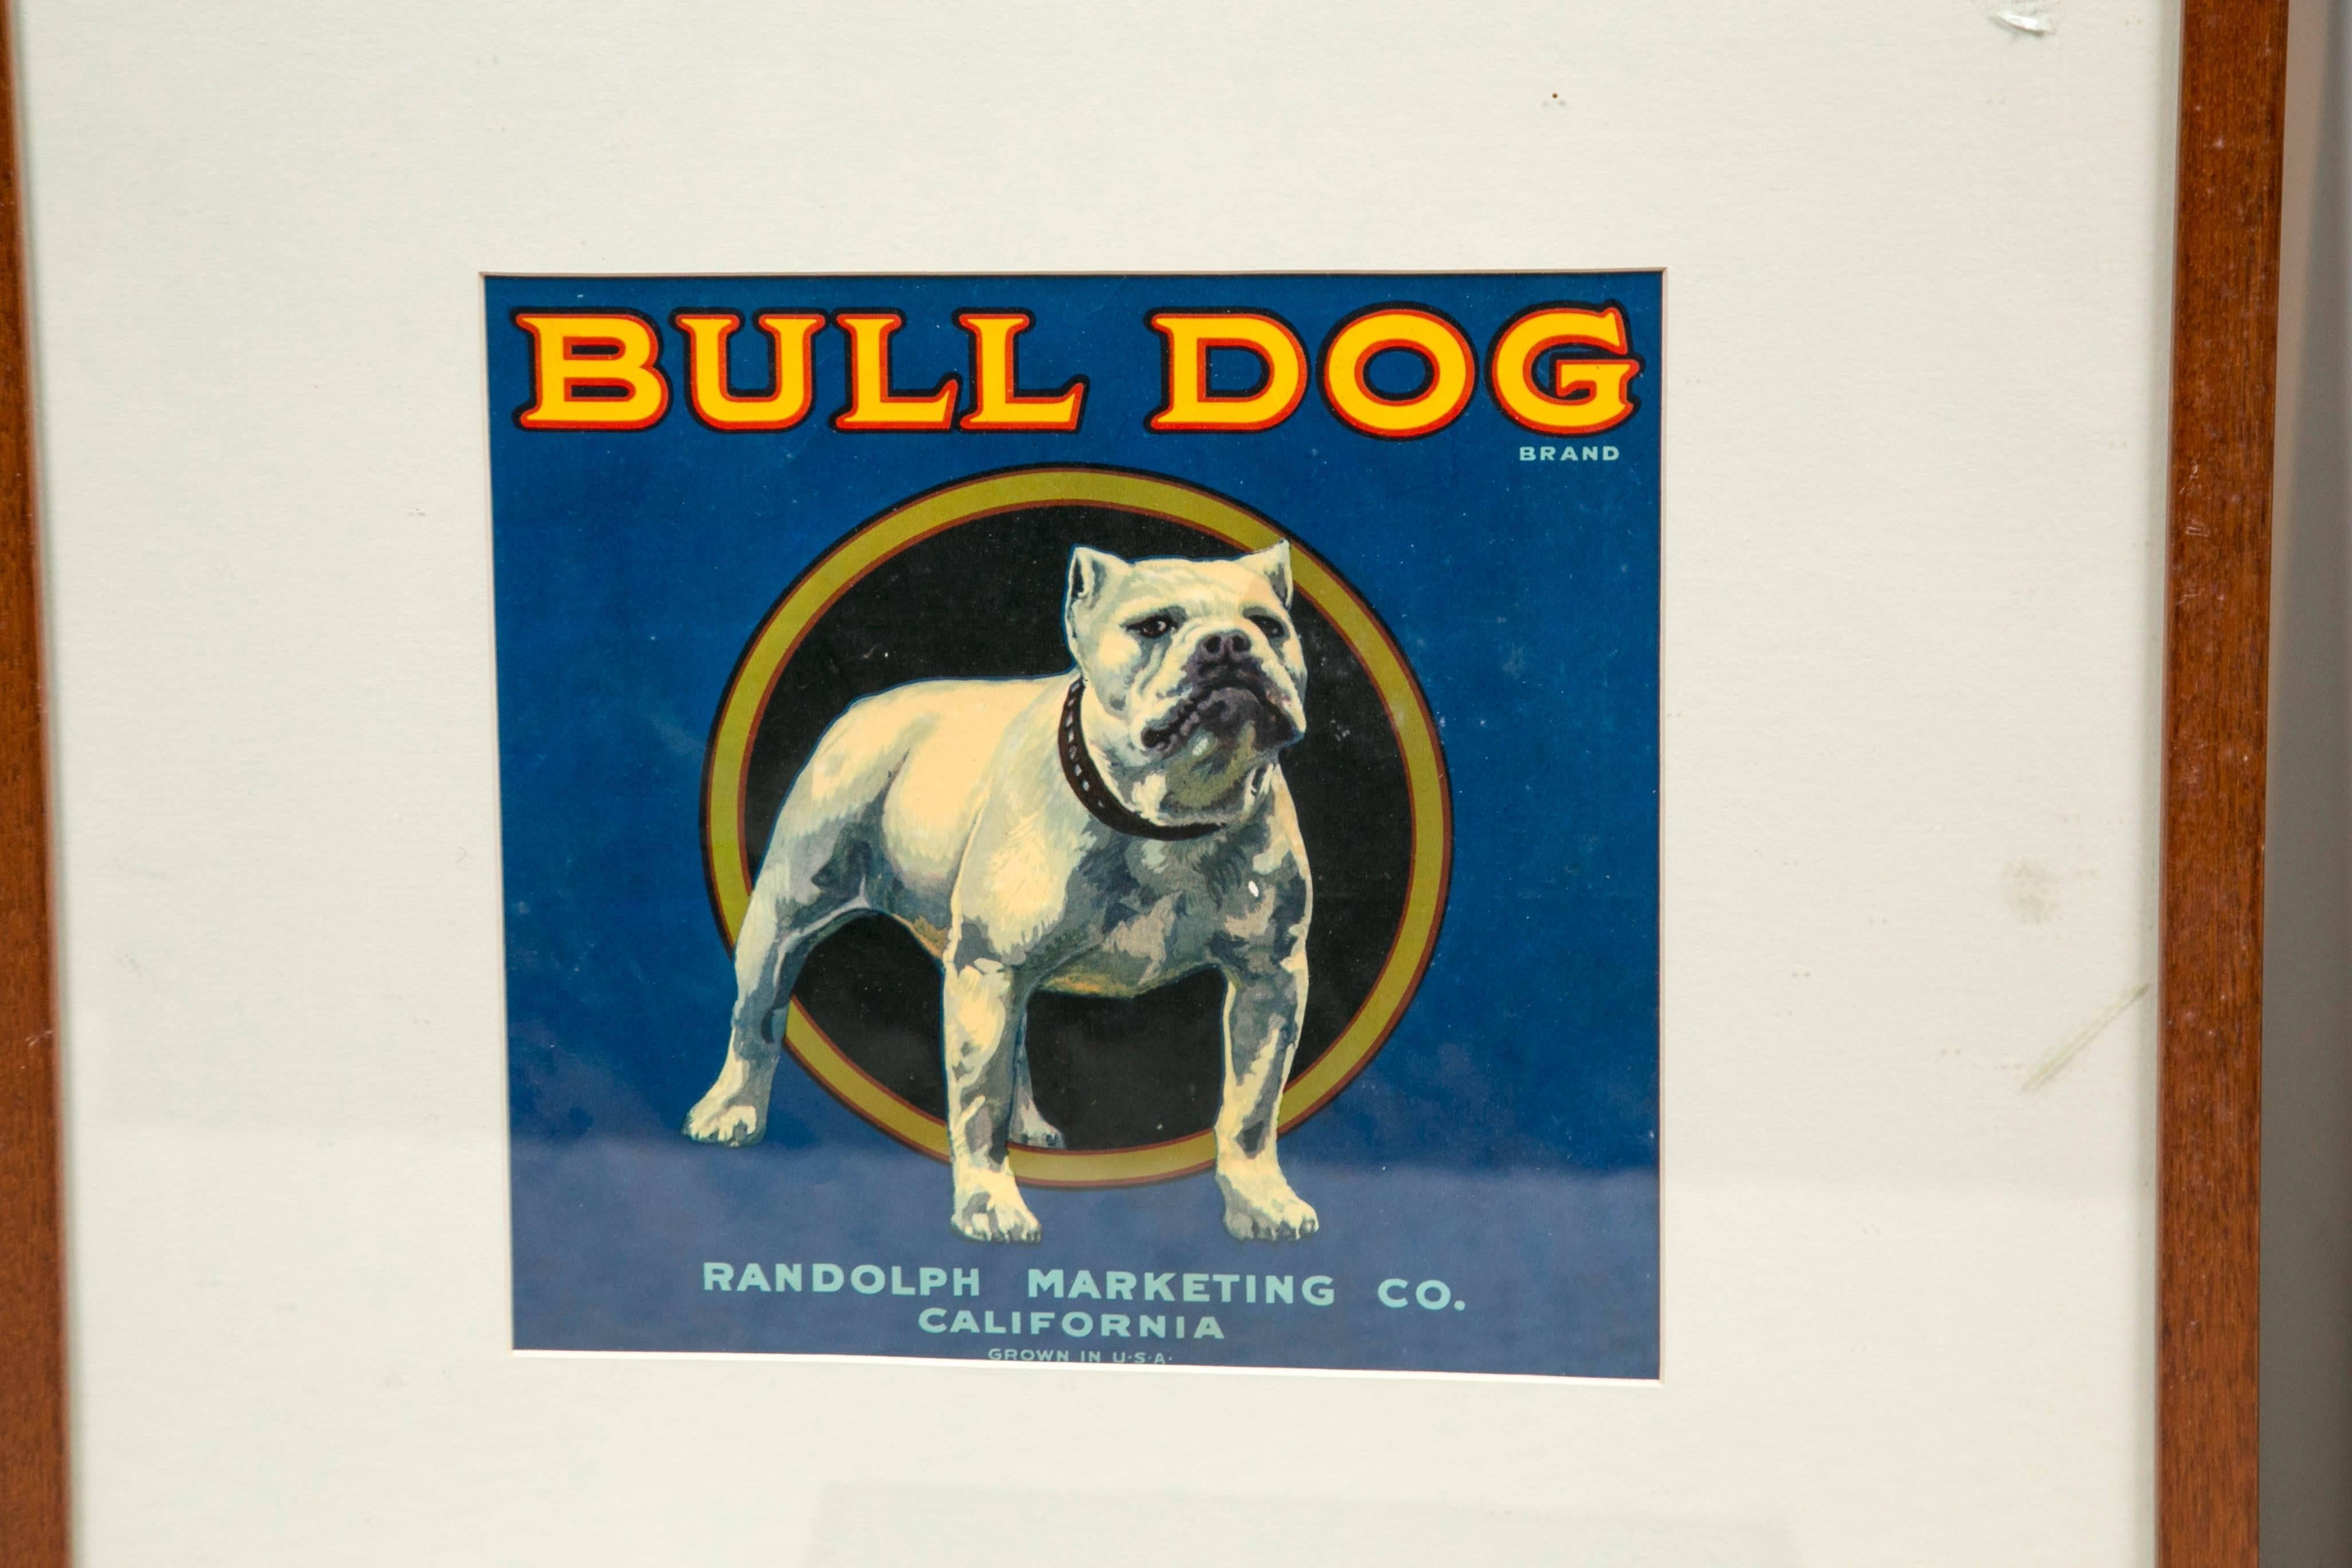 Other Pop Art Collection of Bulldogs